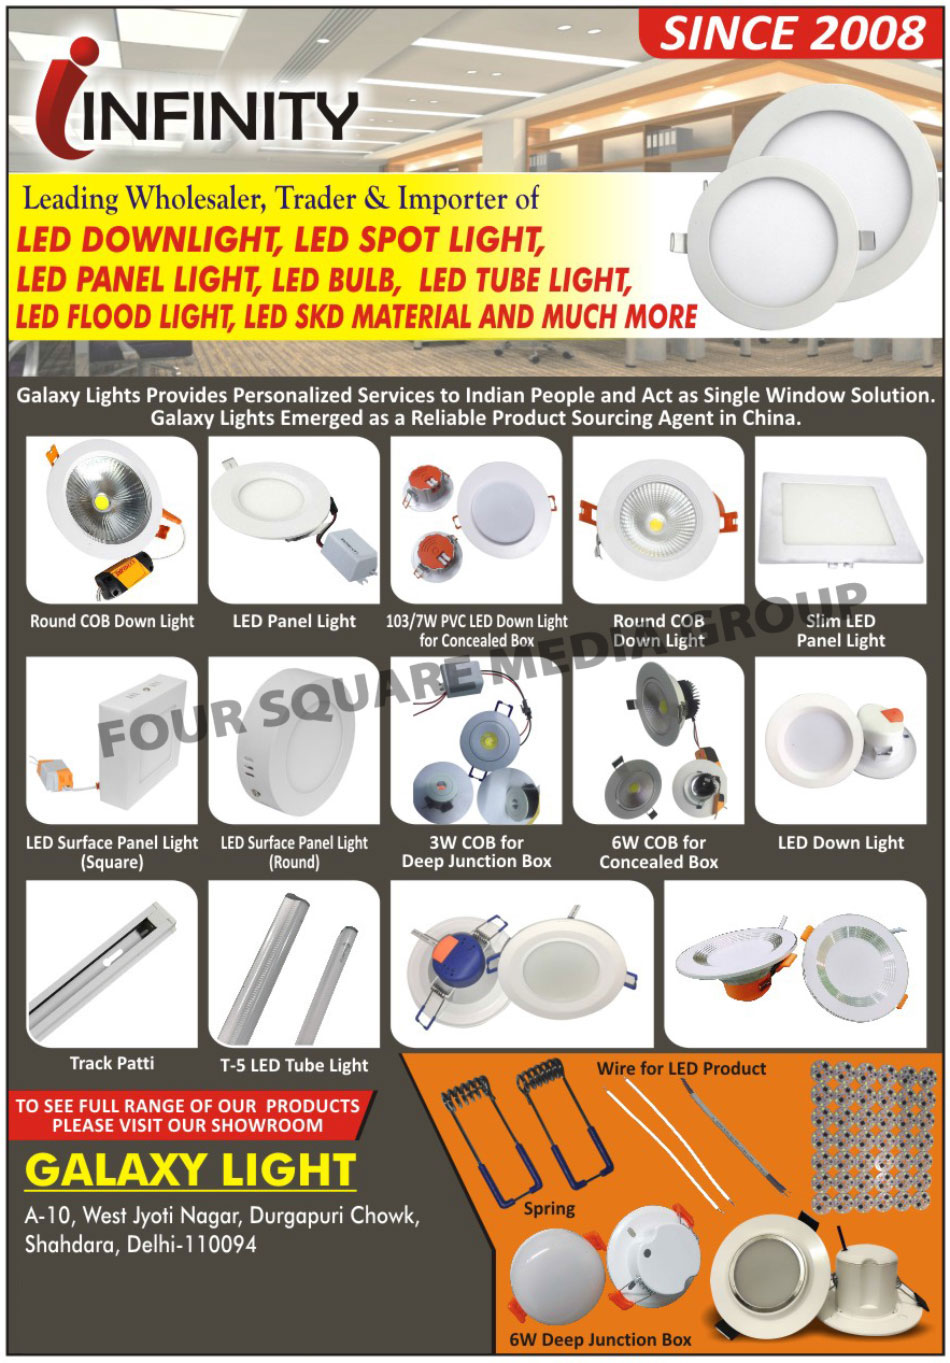 Led Lights, Led Down Lights, Led Spot Lights, Led Panel Lights, Led Bulbs, Led Tube Lights, Led SKD, Dimmable Led Spot Lights, Ceiling Recessed Down Lights, Round COB Down Lights, Slim Led Panel Lights, Square Led Surface Panel Lights, Round Led Surface Panel Lights, Led COB Wall Lights, Led Track Lights, Led Light Bulb, Fluorescent Batten Fitting, Led Flood Lights, Led SKD Material, PVC Led Down Lights, Deep Junction Box COB, Concealed Box COB, Track Patti, Led Product Wire, Led Springs, Deep Junction Boxes